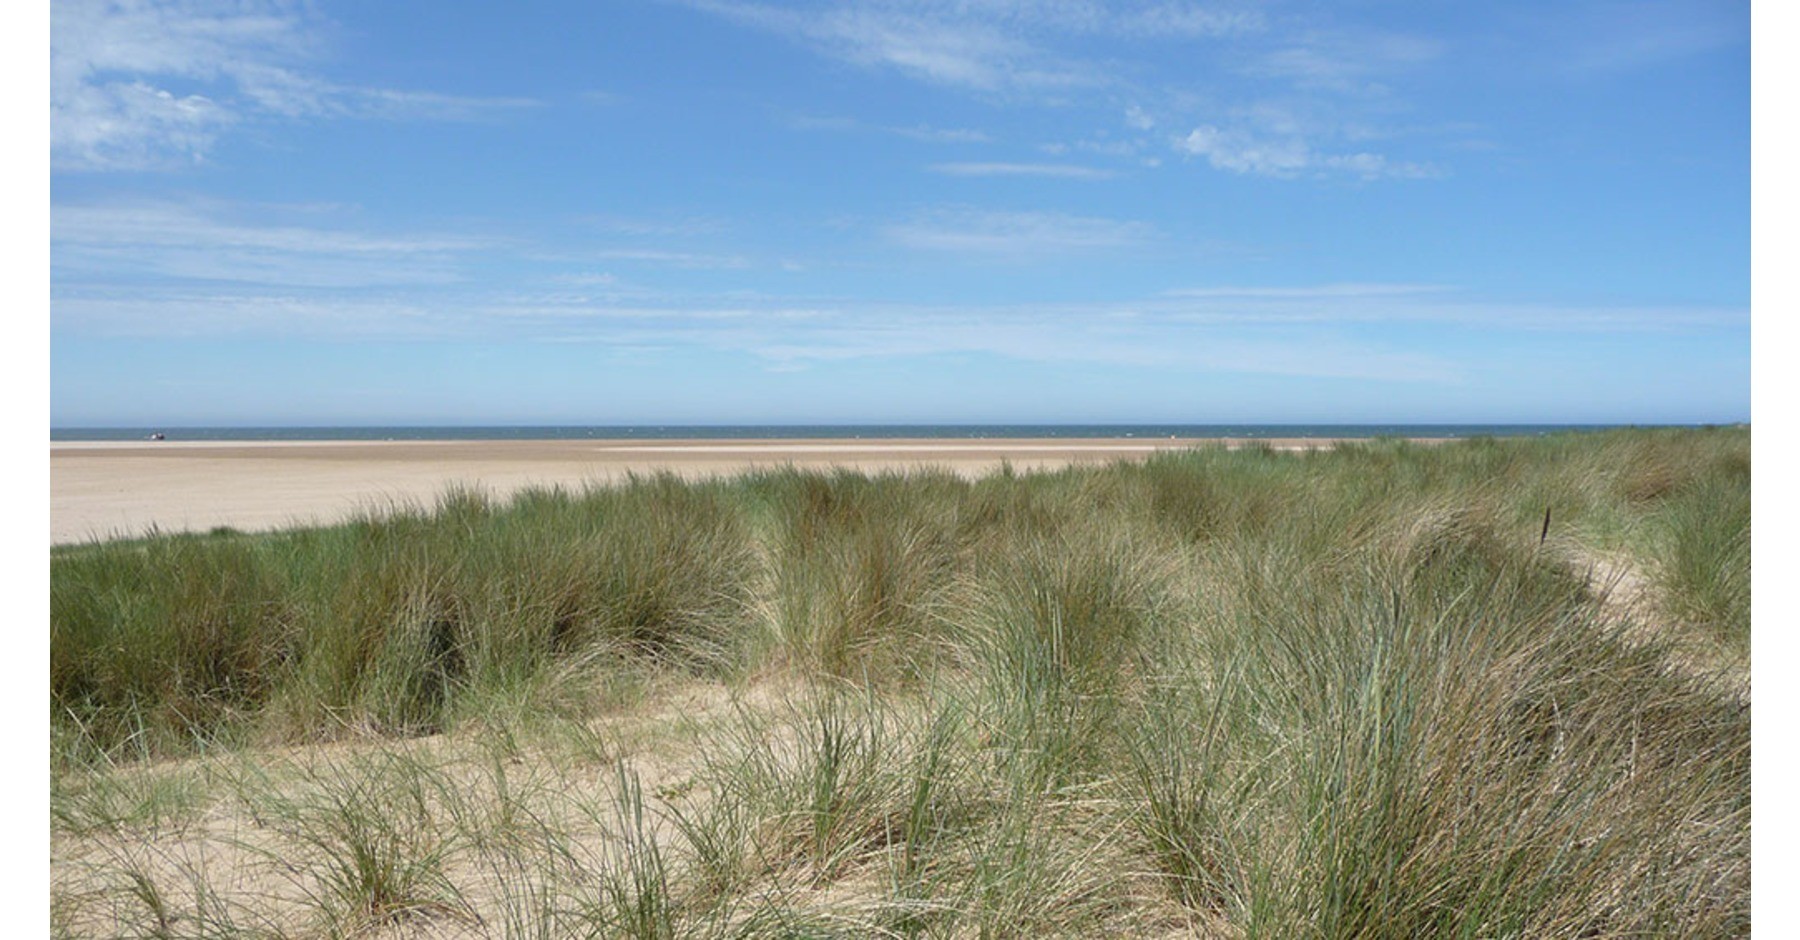 The Holkham Experience